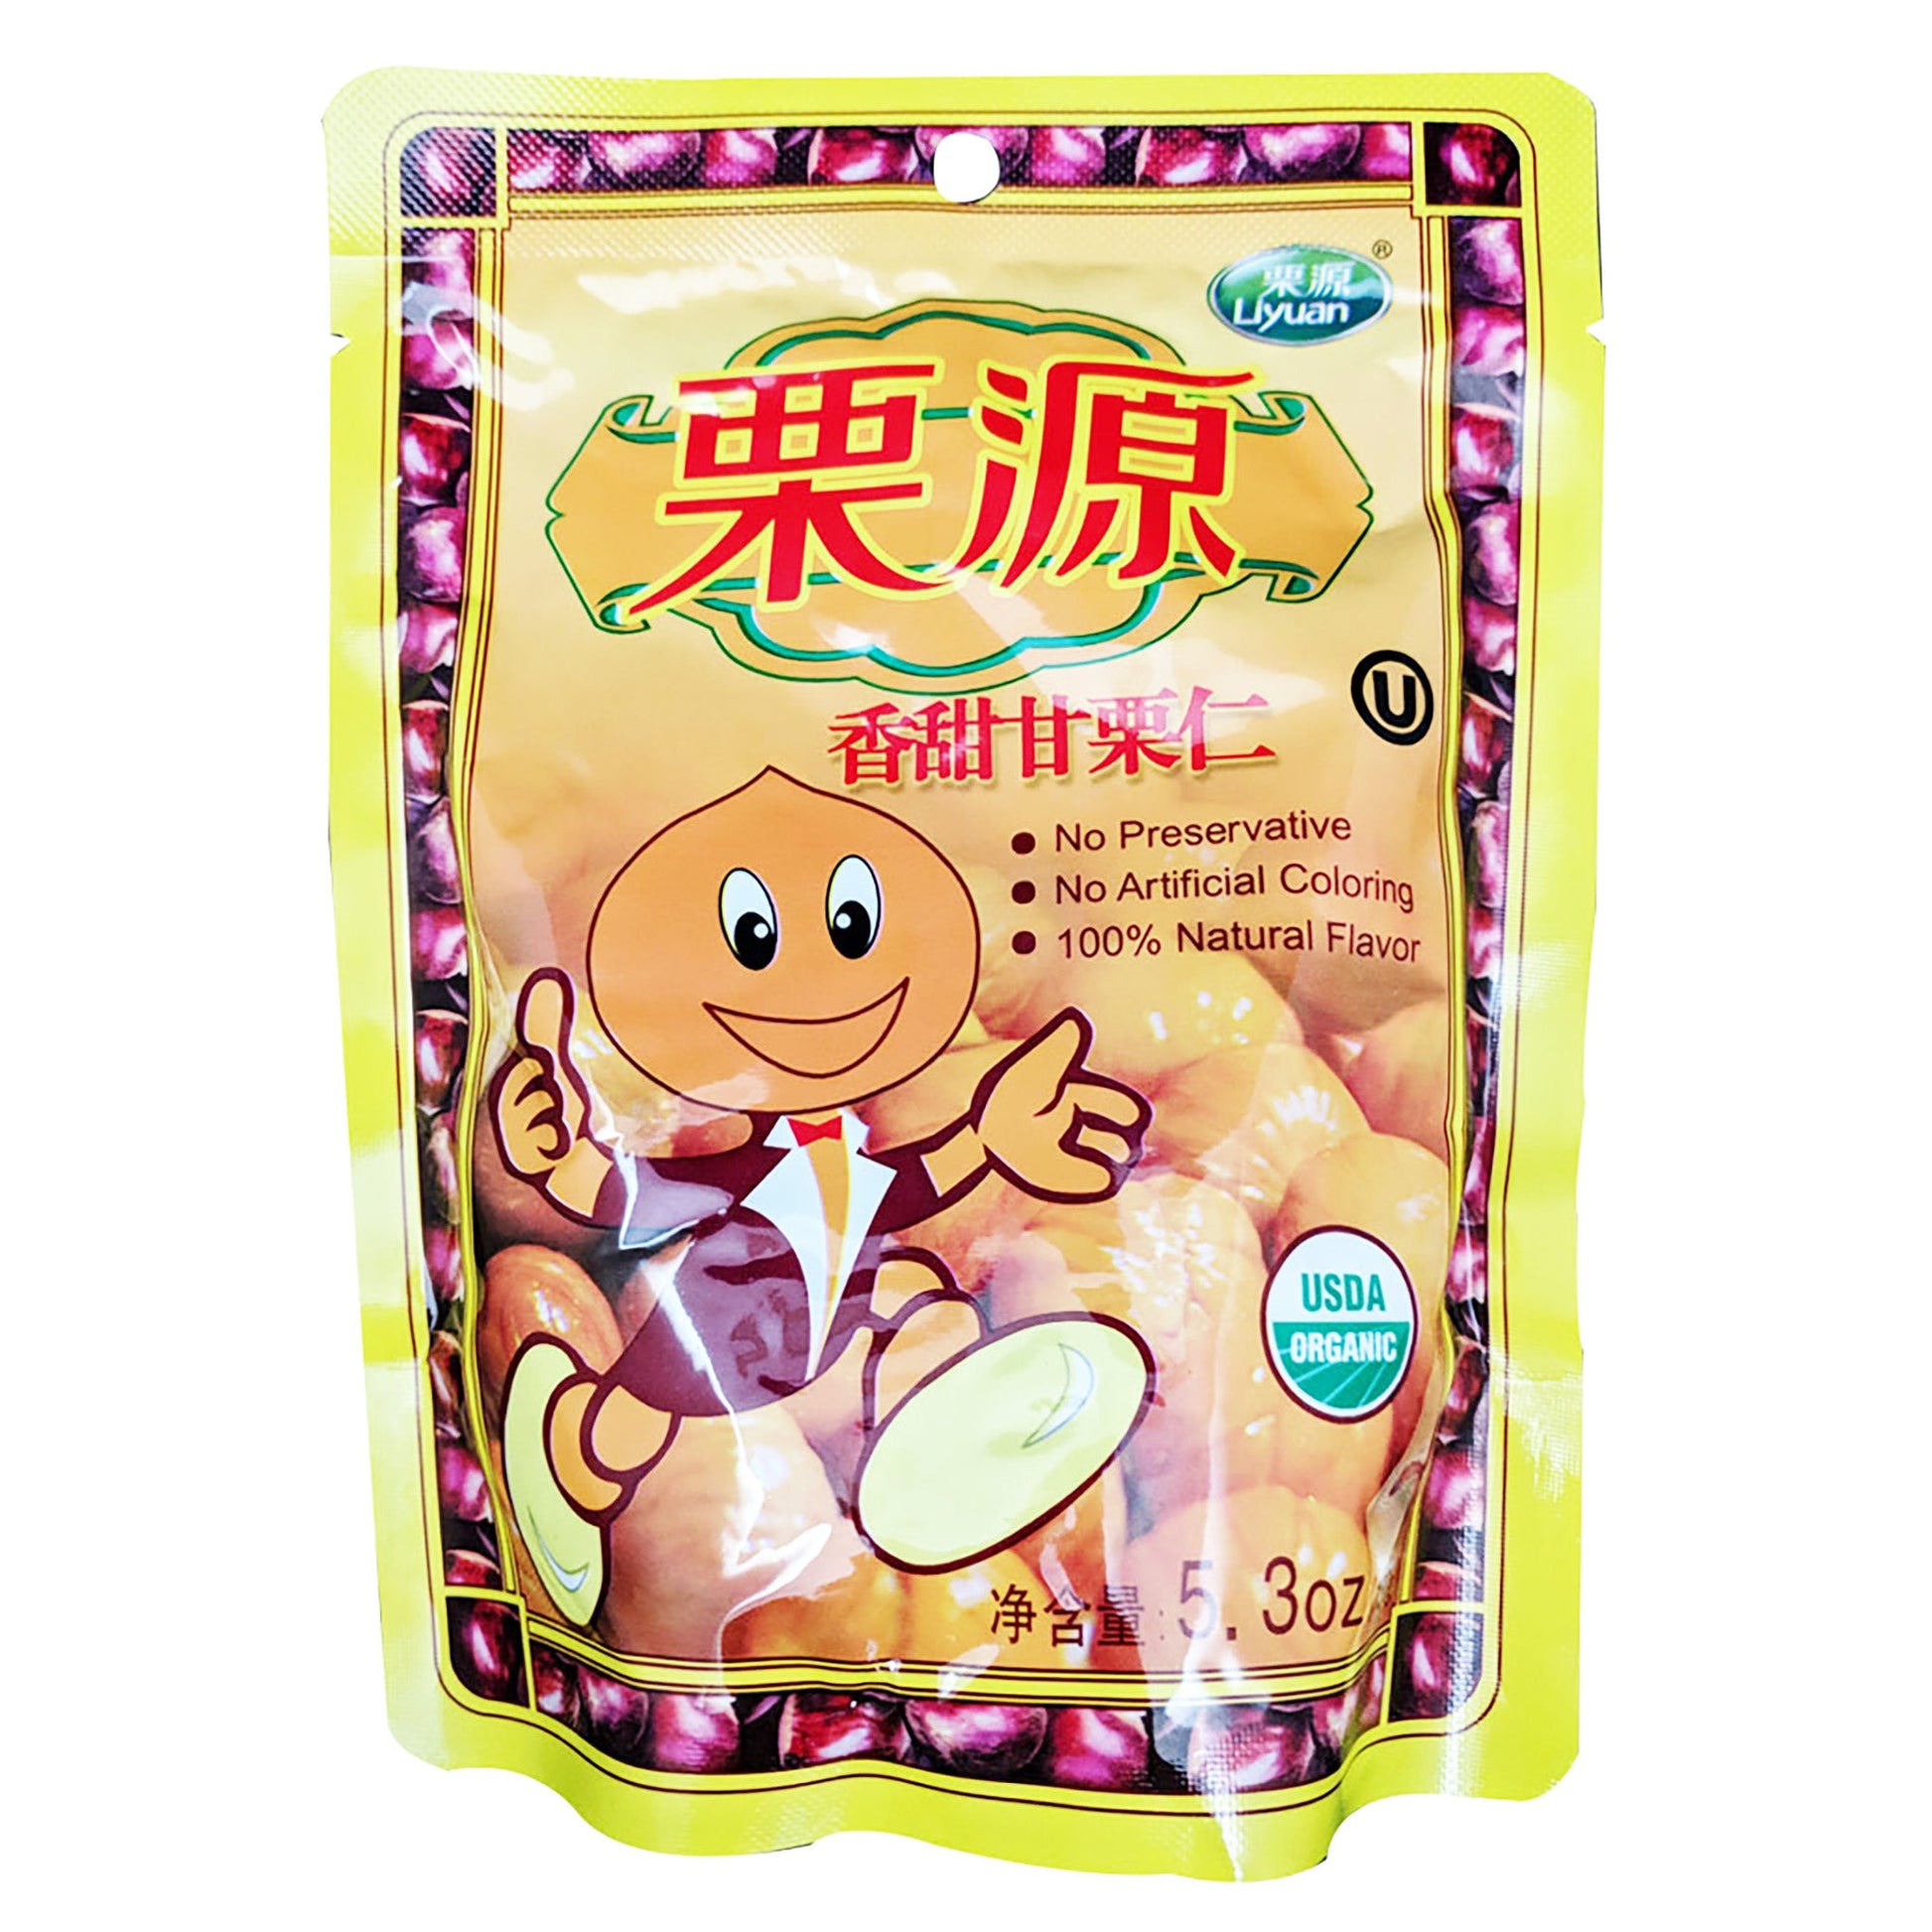 Front graphic image of Liyuan Roasted Organic Chestnuts 5.3oz